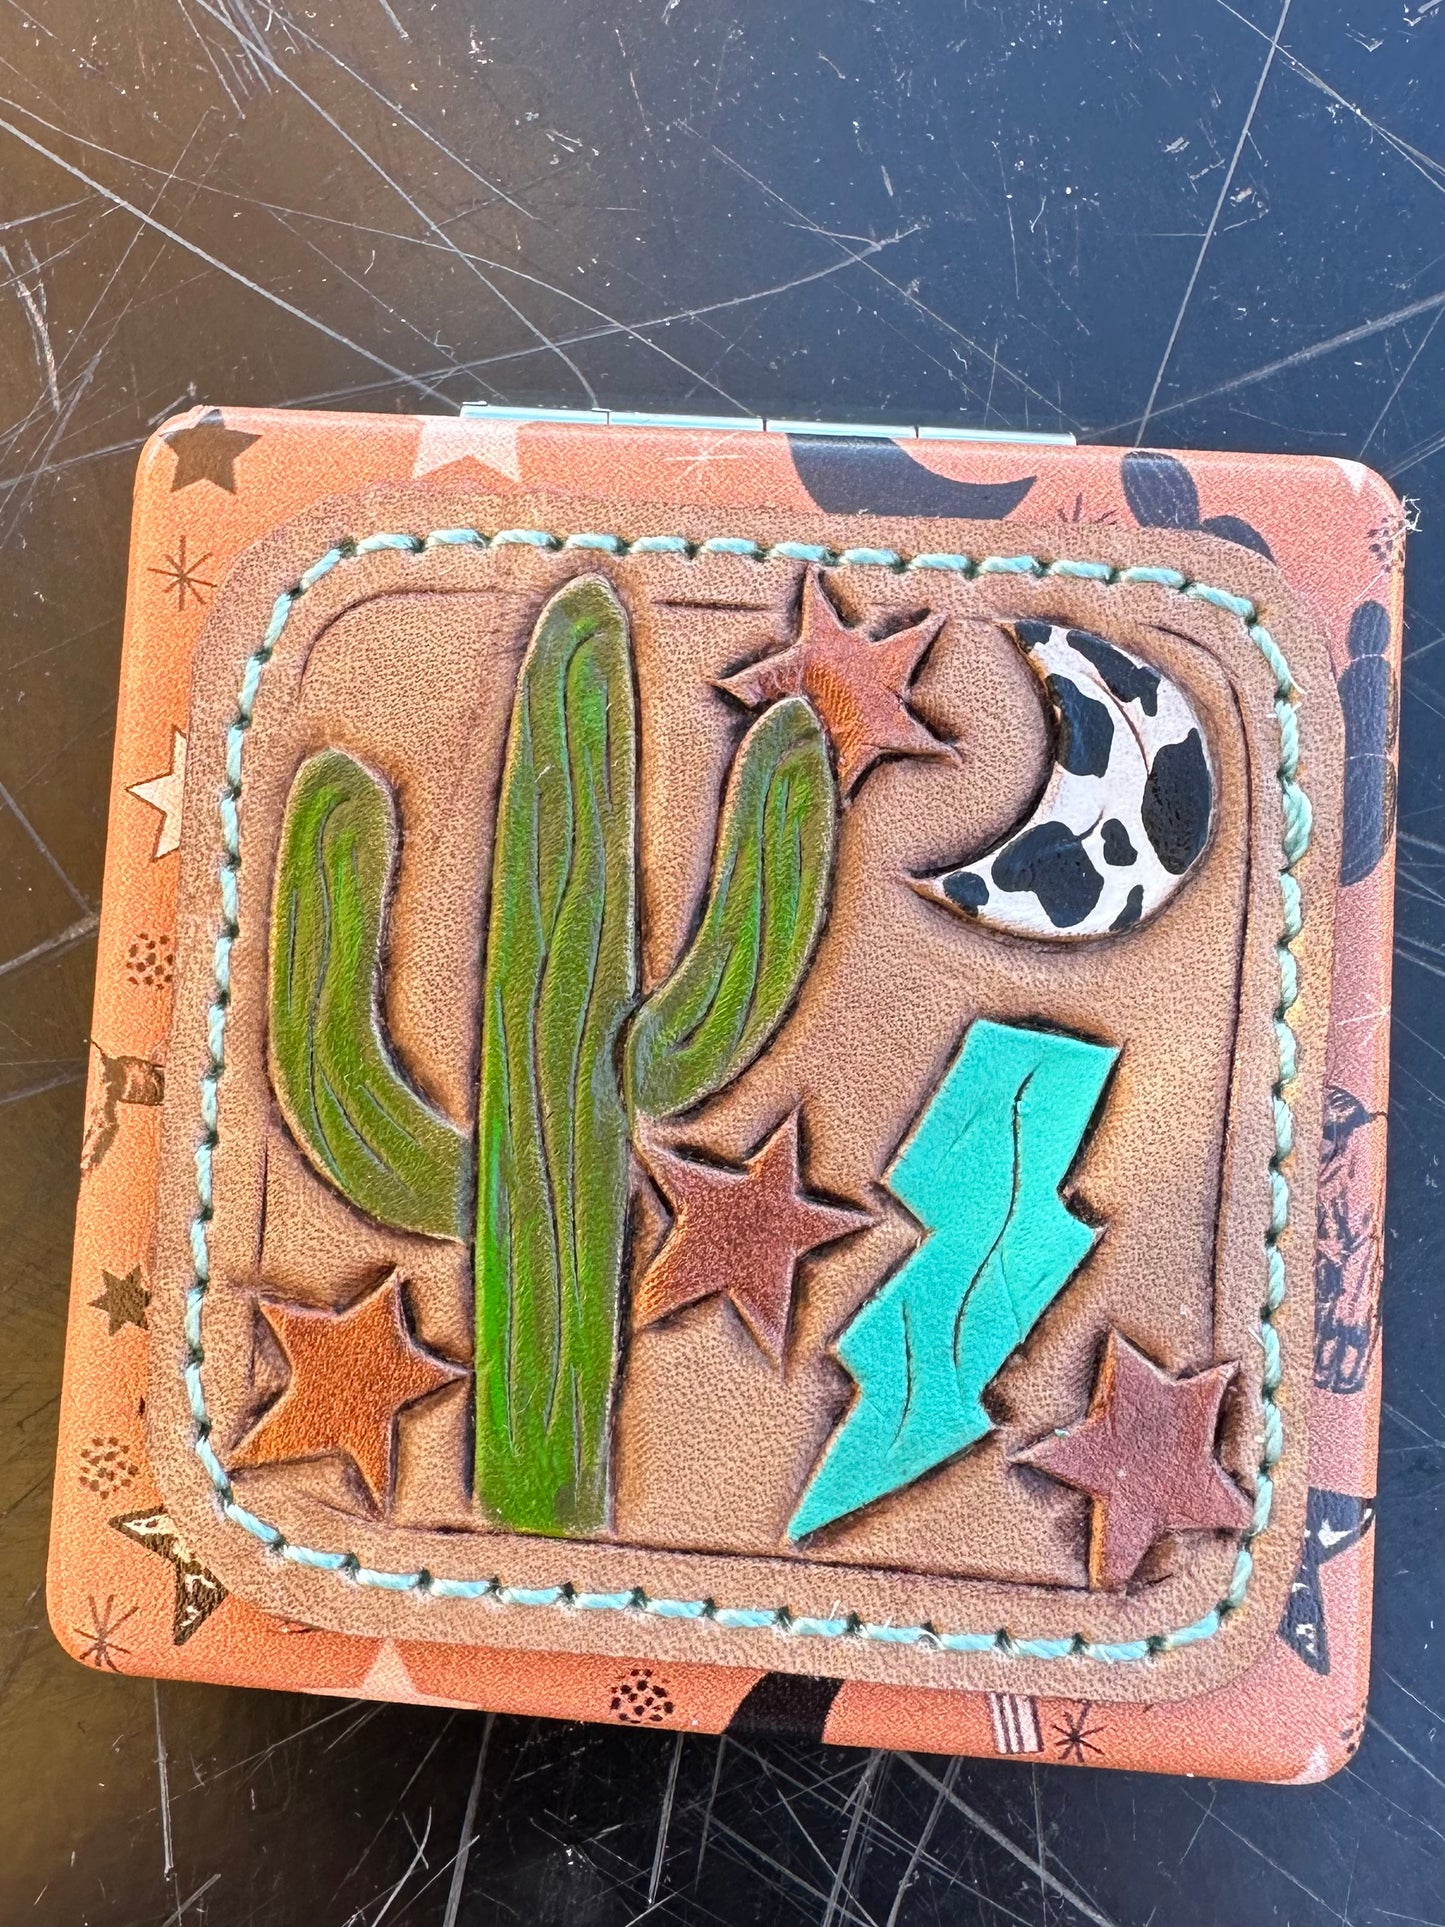 Western tooled leather cactus and star patch compact mirror